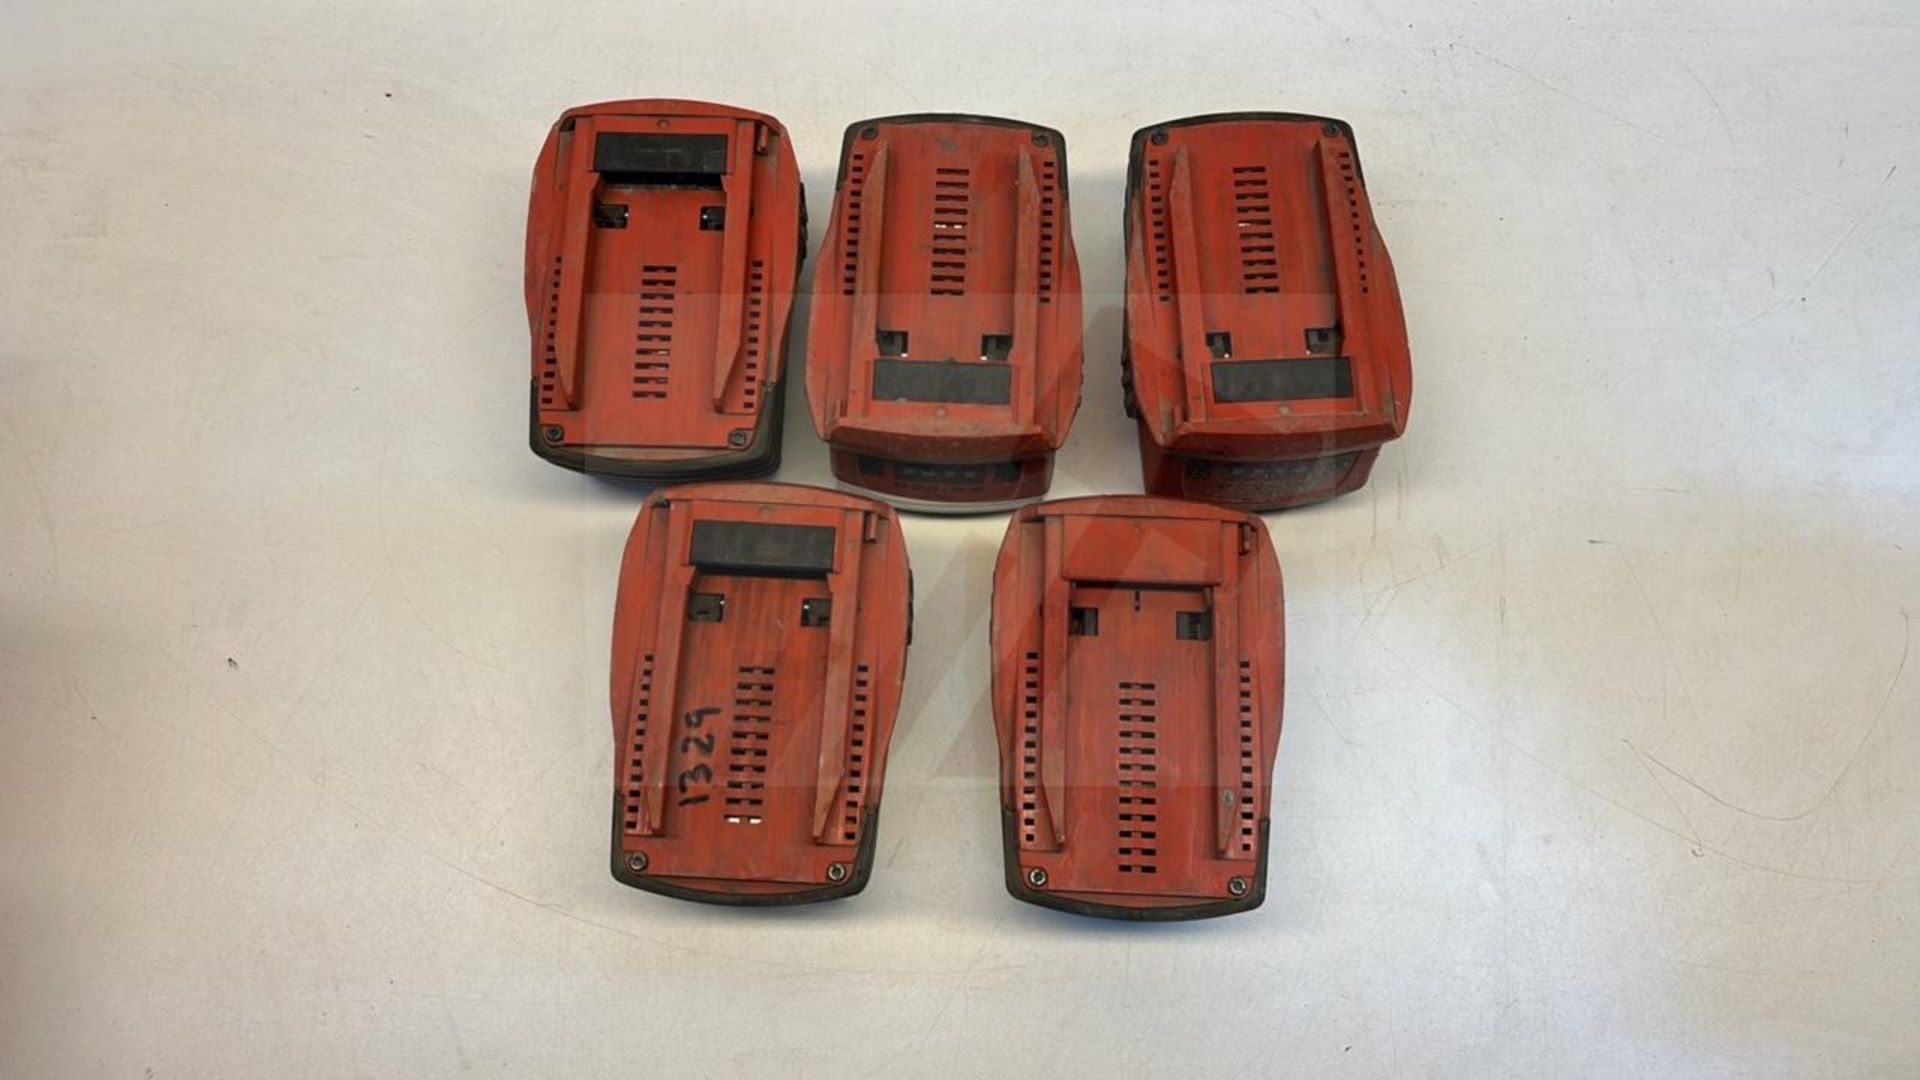 5 x Hilti Batteries As Pictured